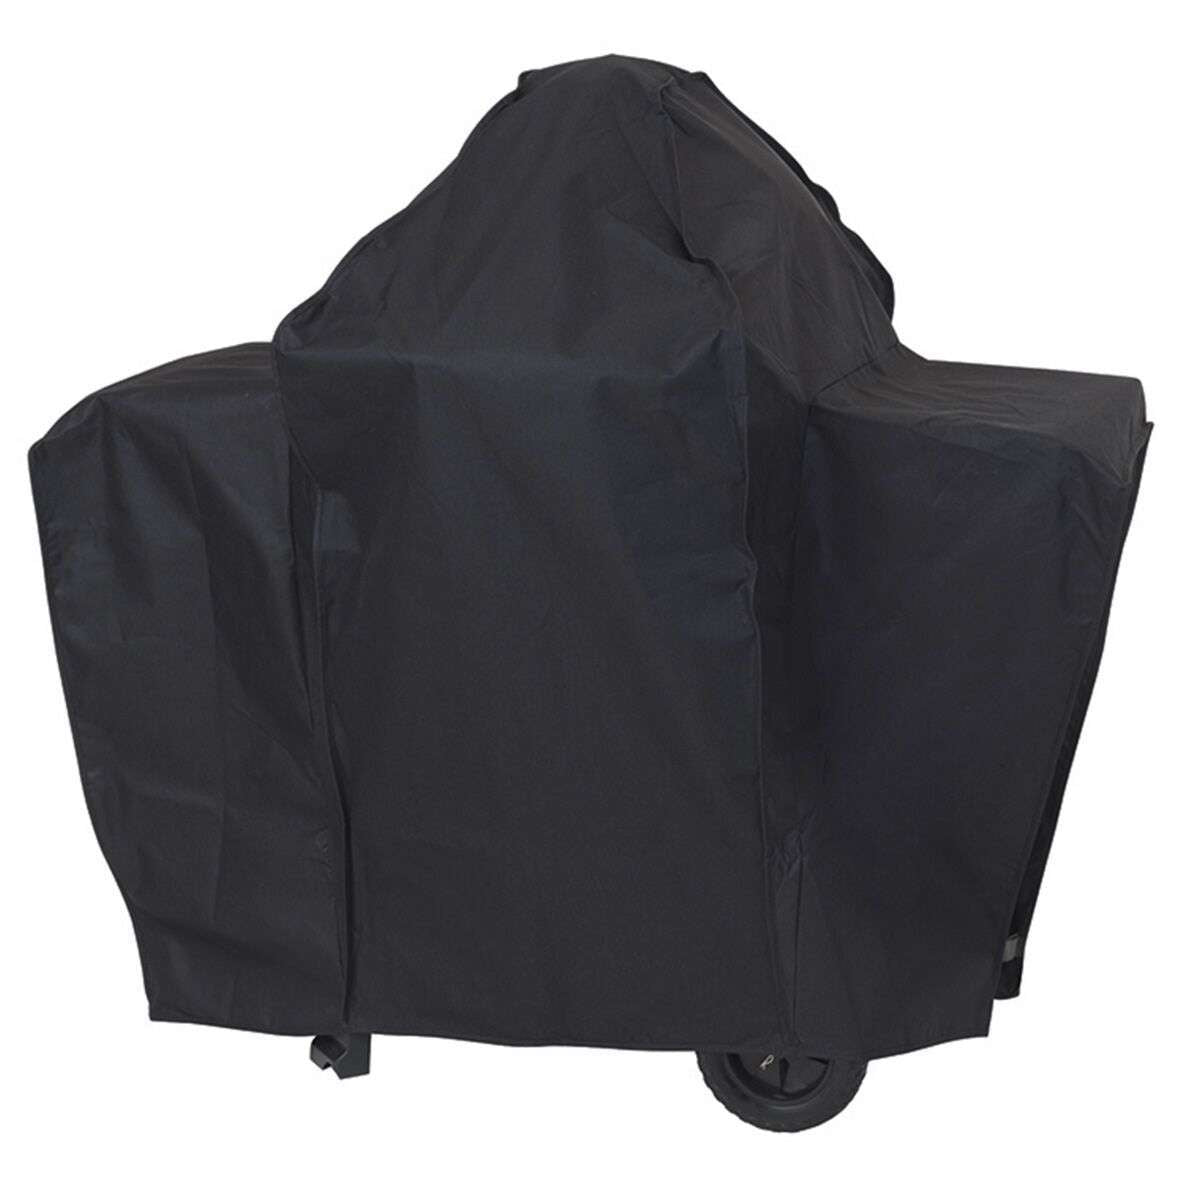 Exceptional Garden:Lifestyle Dragon Egg Charcoal BBQ Cover